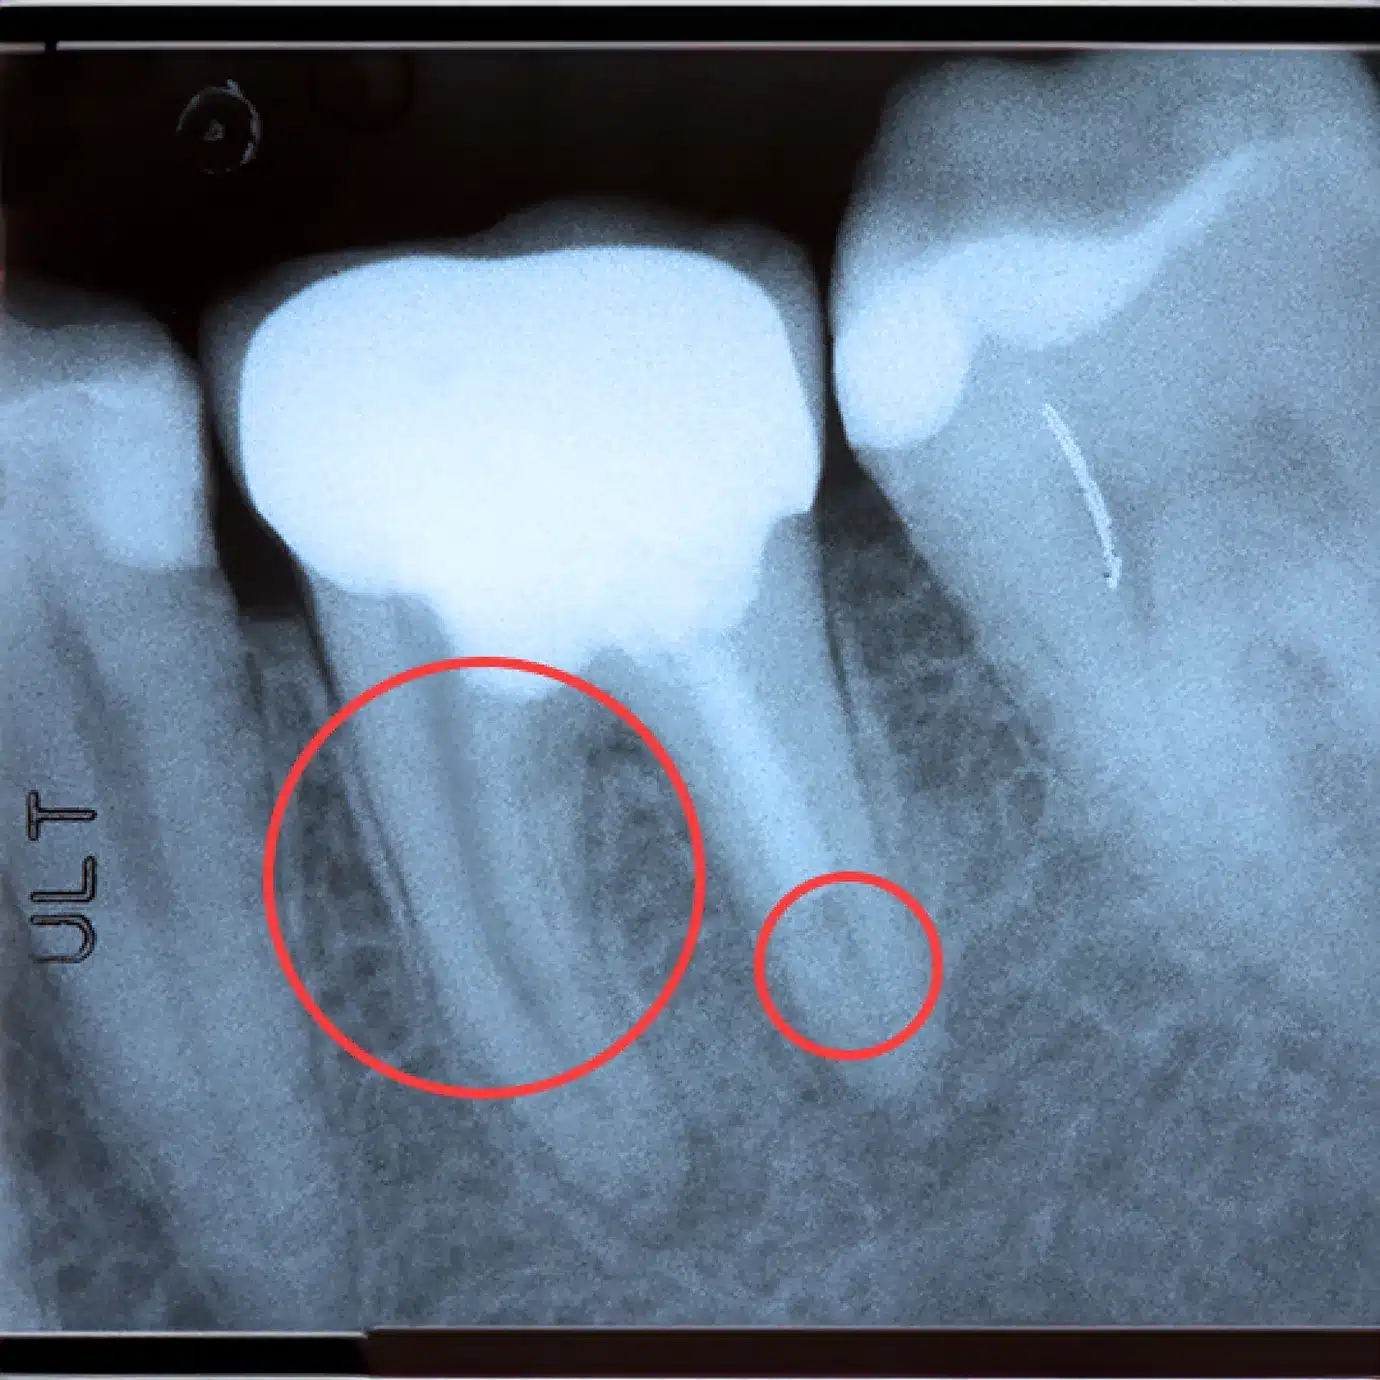 TIP: What to look for in root canal treatment?